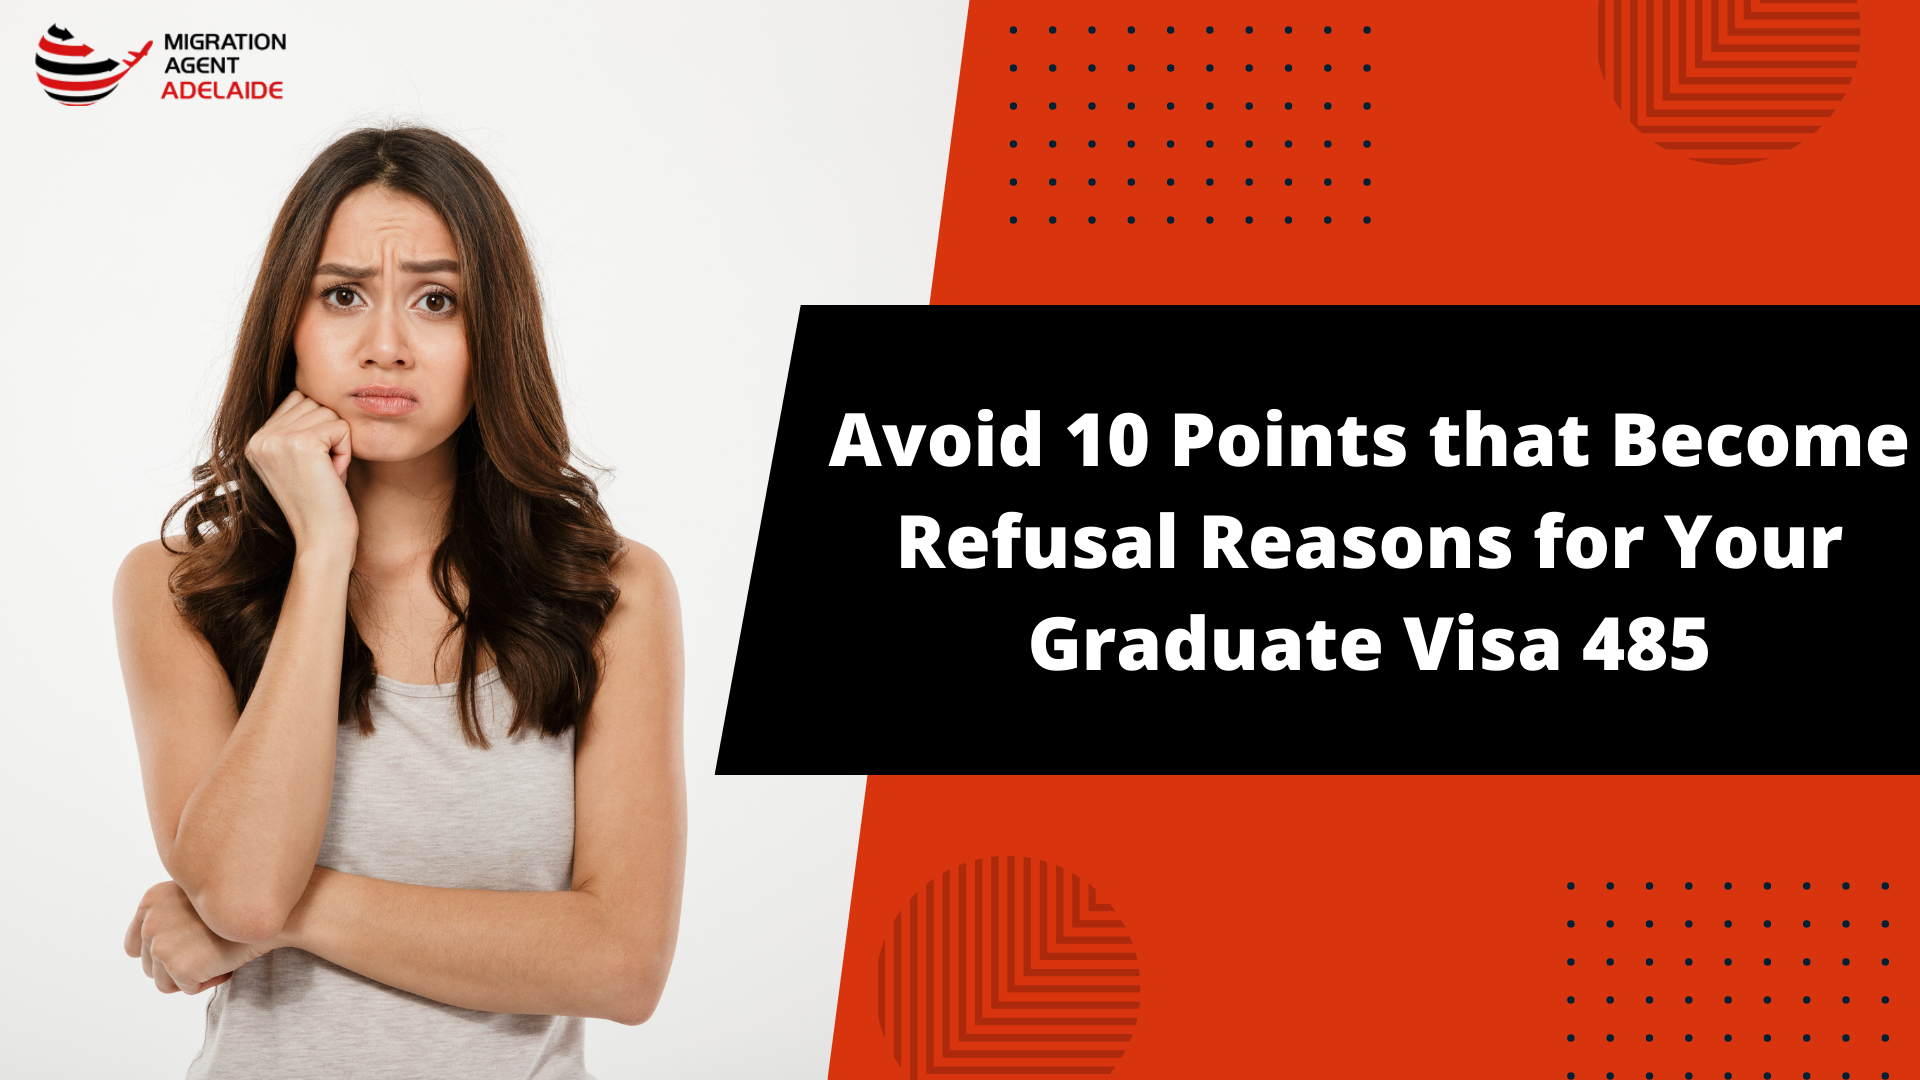 Avoid 10 Points that Become Refusal Reasons for Your Graduate Visa 485